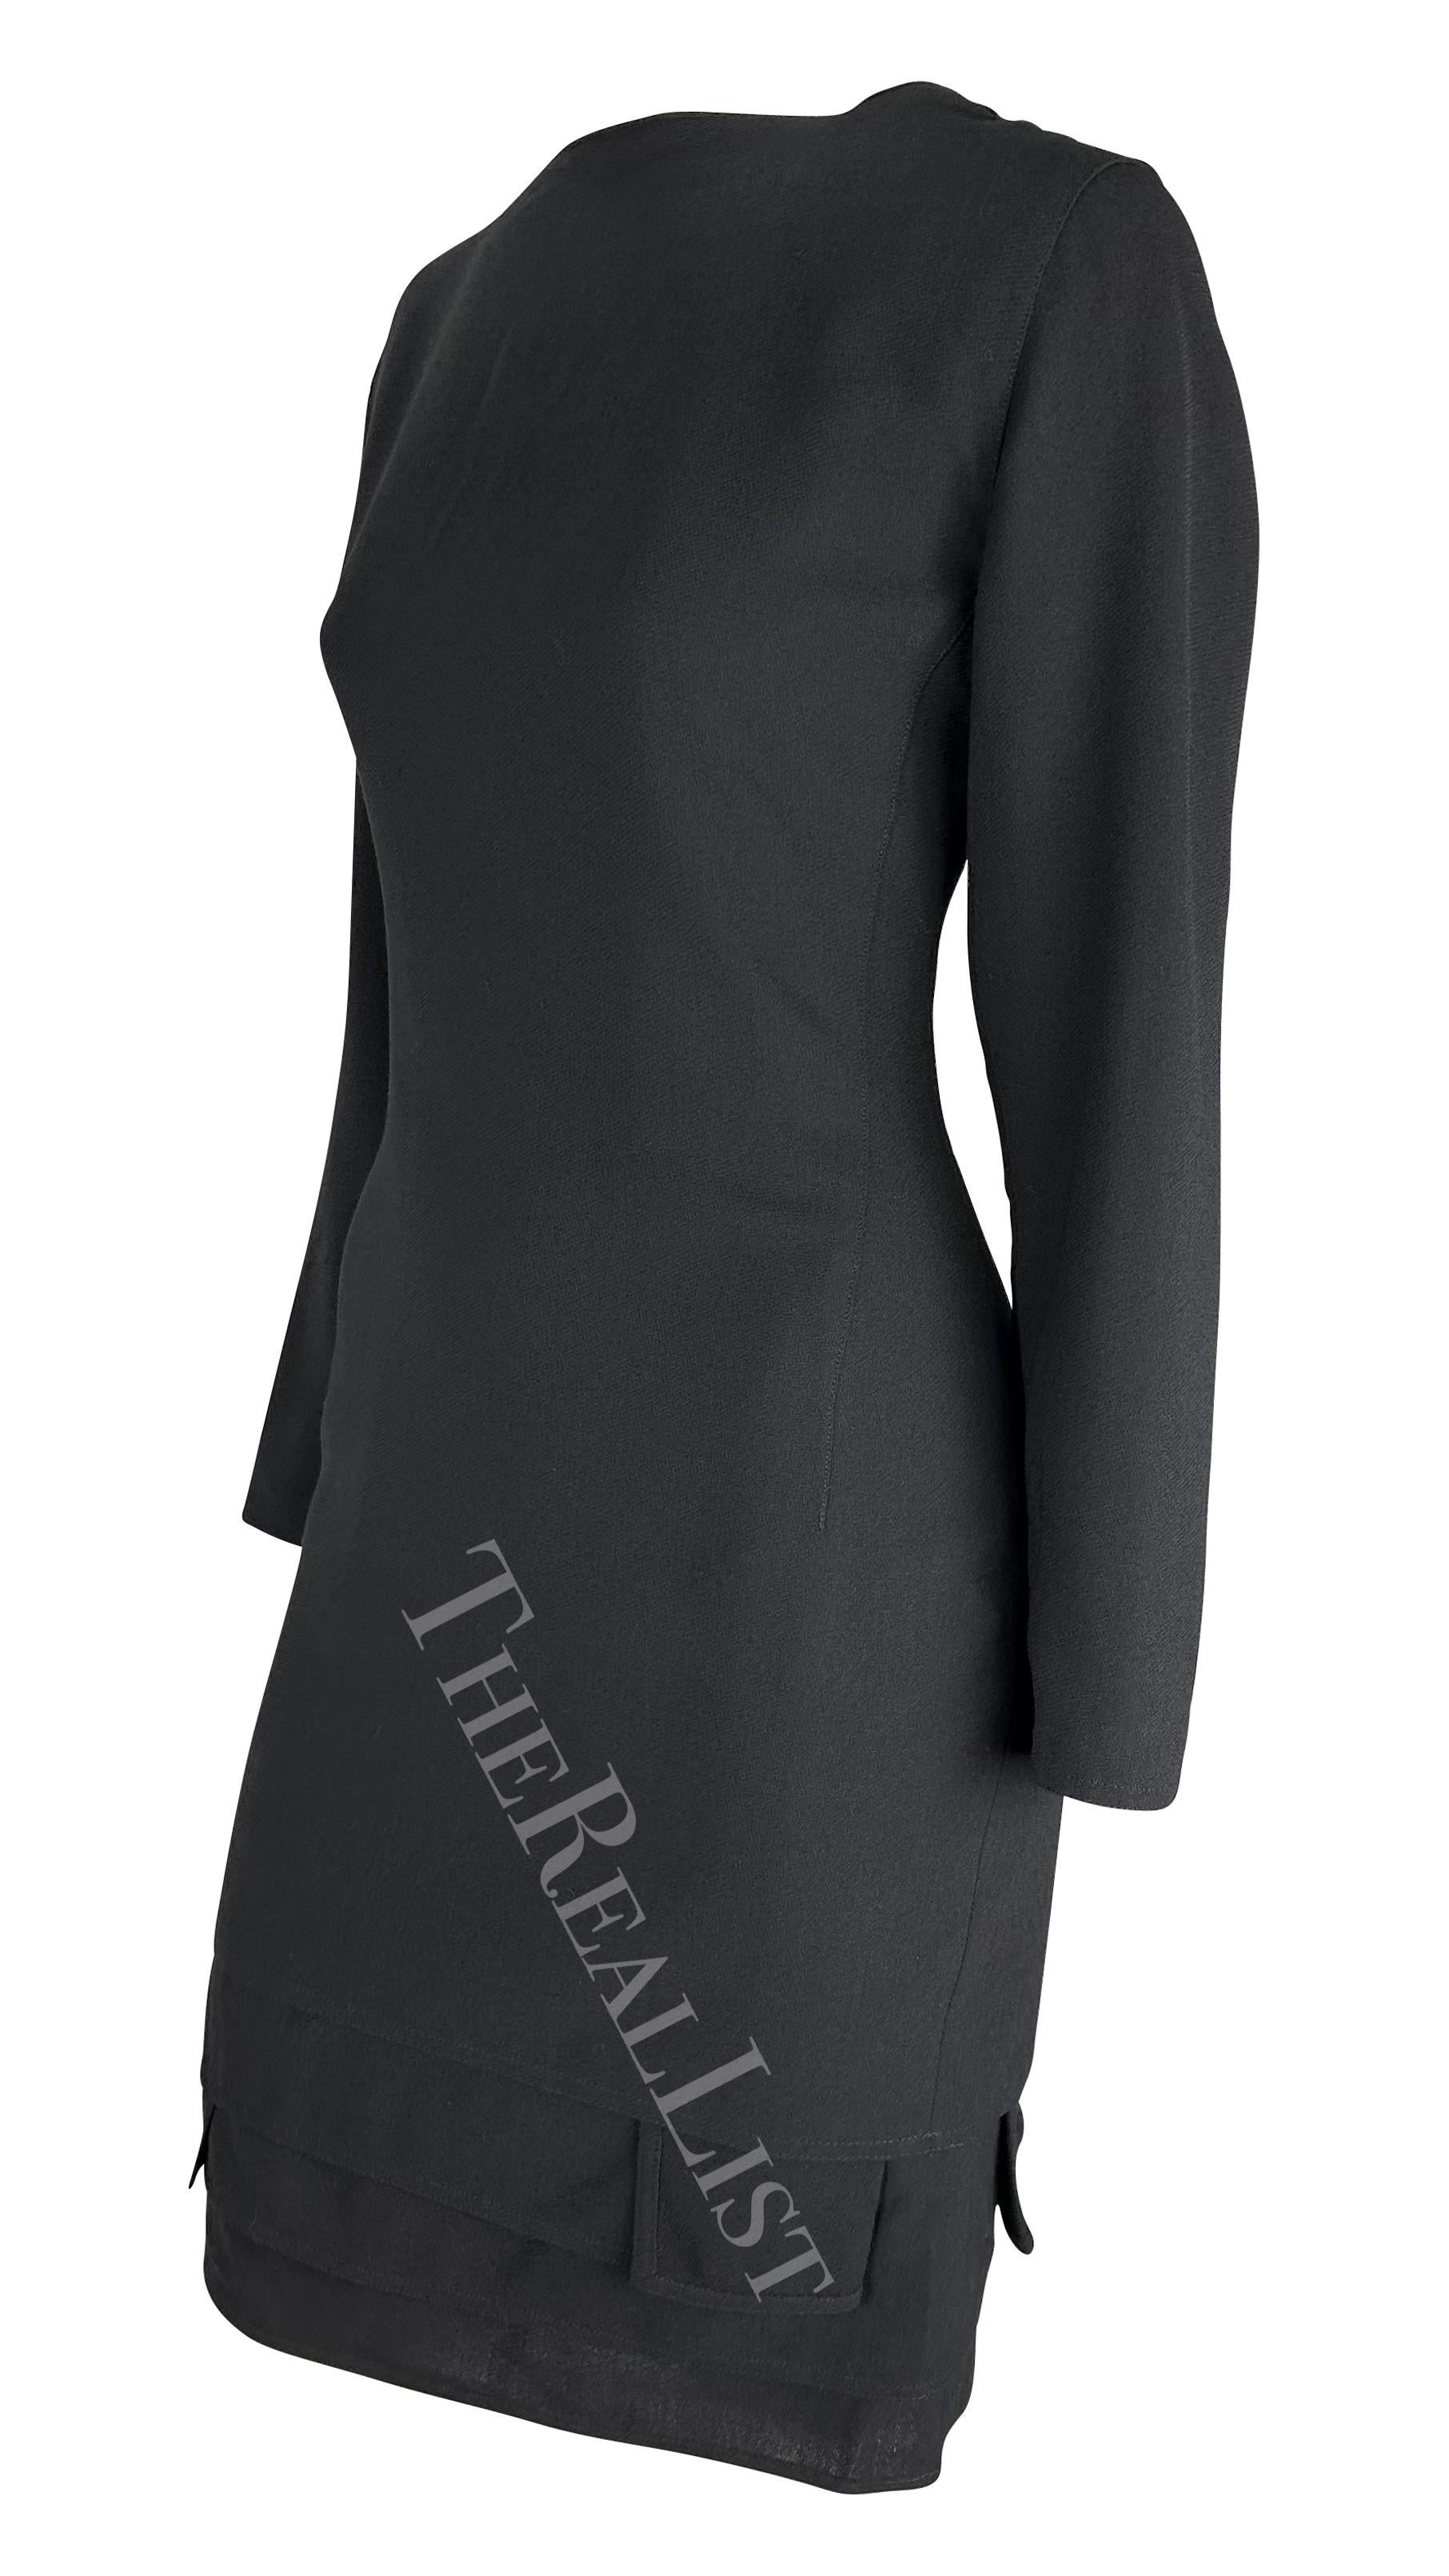 Presenting a fabulous black long-sleeve Gianni Versace dress, designed by Gianni Versace. From the 1980s, this chic little black dress features a high angular neckline and is made complete with a tiered hem. 

Approximate measurements:
Size -